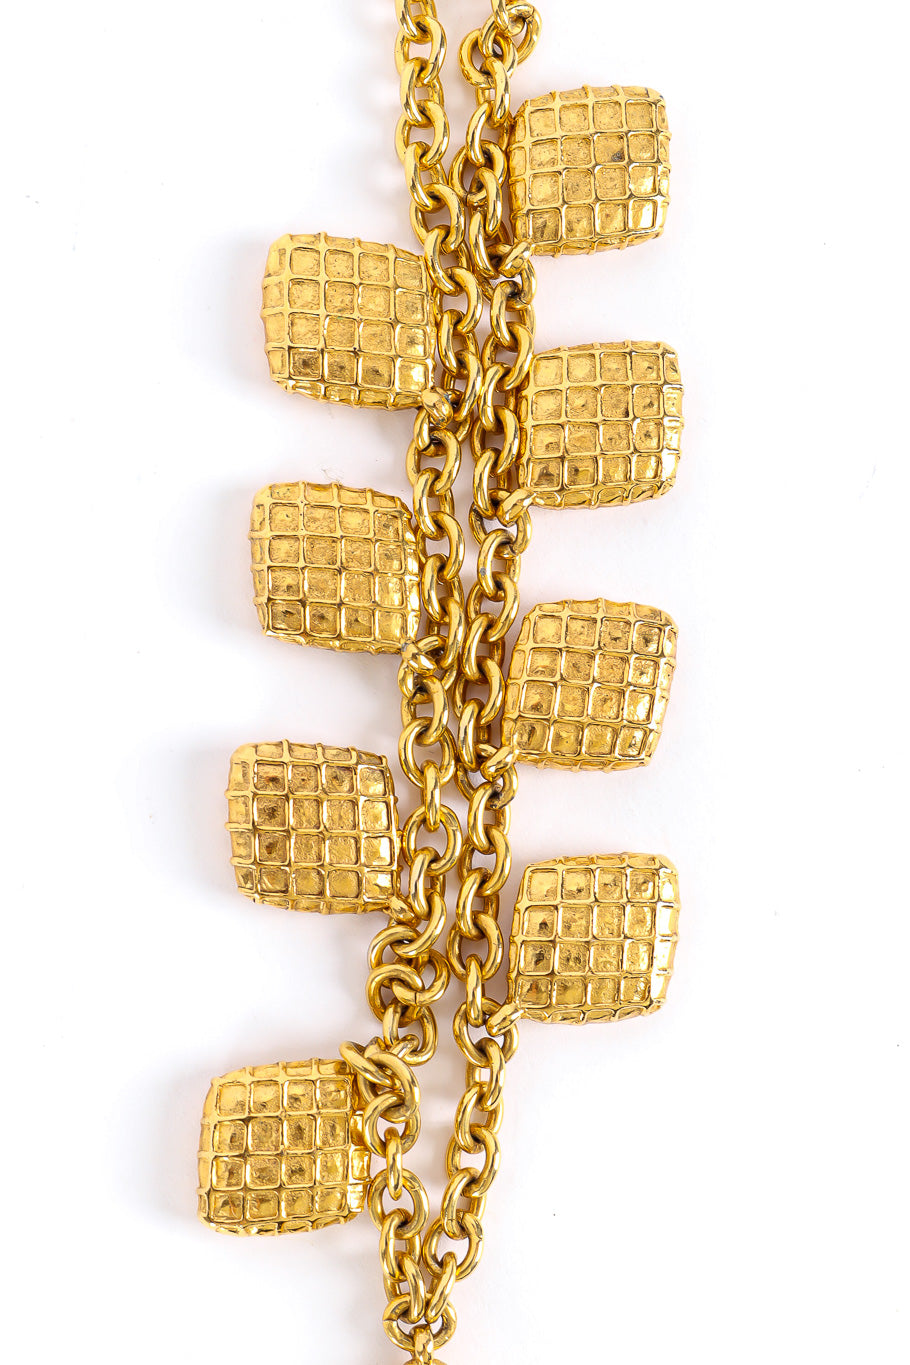 Vintage Chanel Mademoiselle Charm Necklace closeup textured charms @recessla